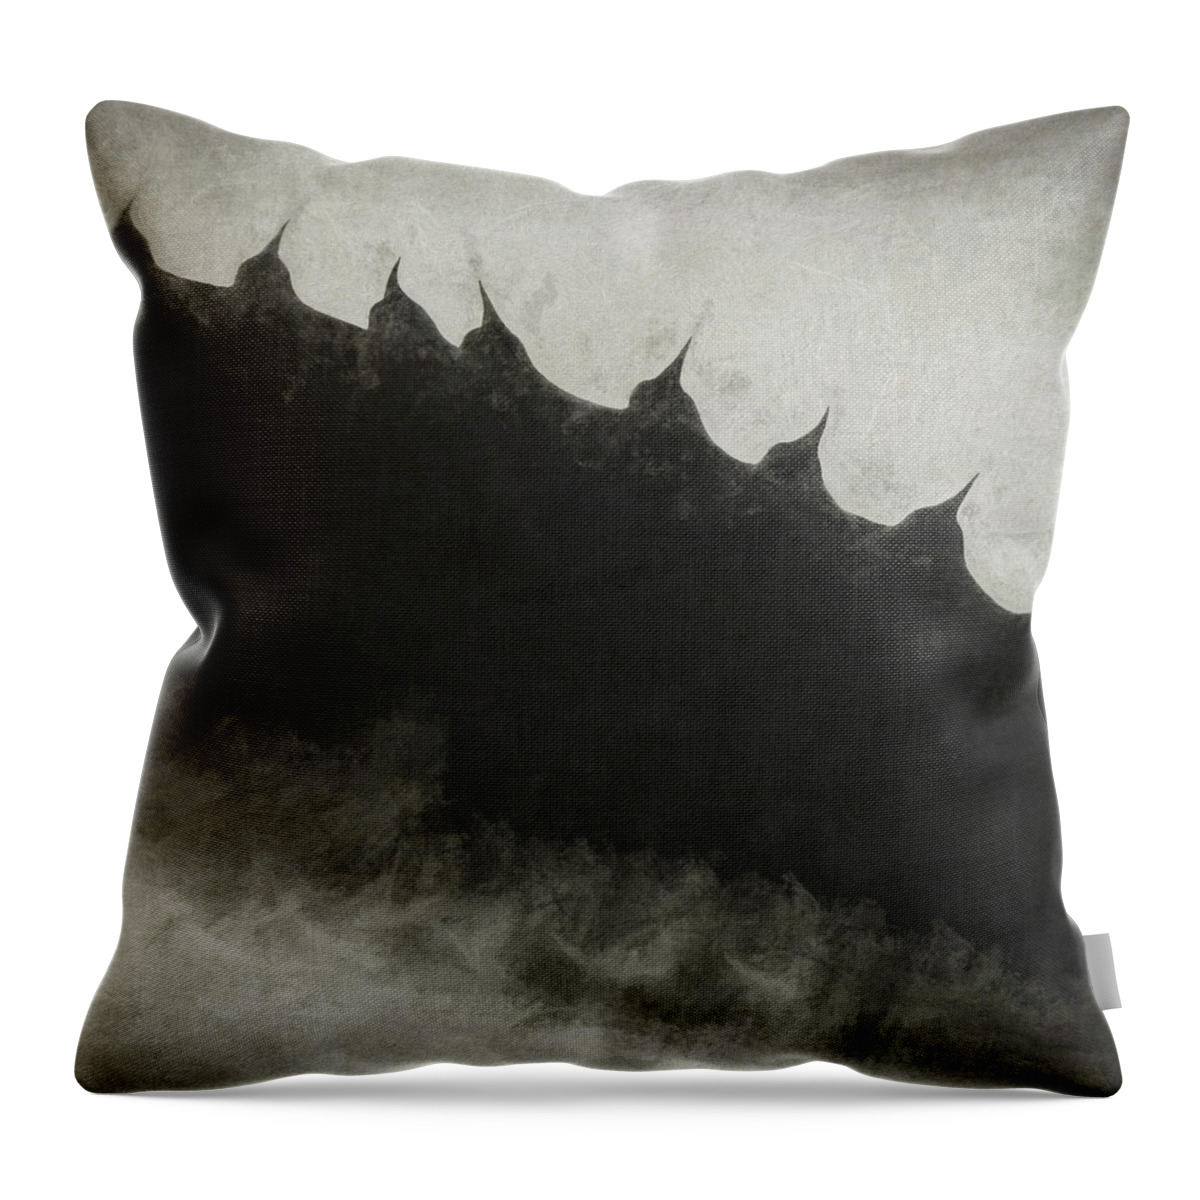 Agave Throw Pillow featuring the photograph Agave Impression Five by Carol Leigh